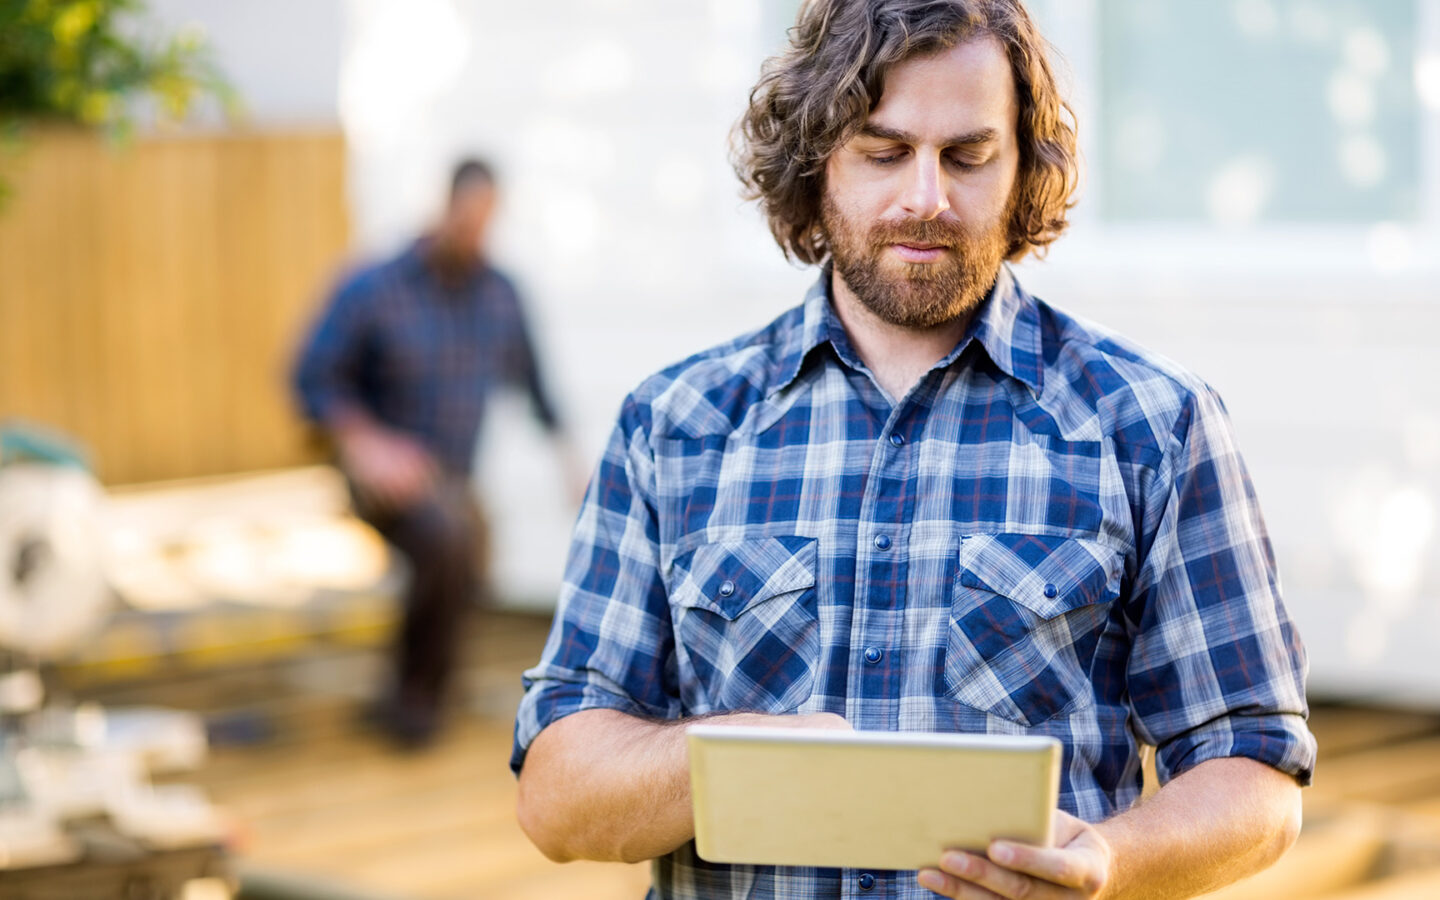 A white man with medium curly hair and a beard wearing a blue flannel shirt is working on a tablet. Blurred in the background is another man working on a construction project.